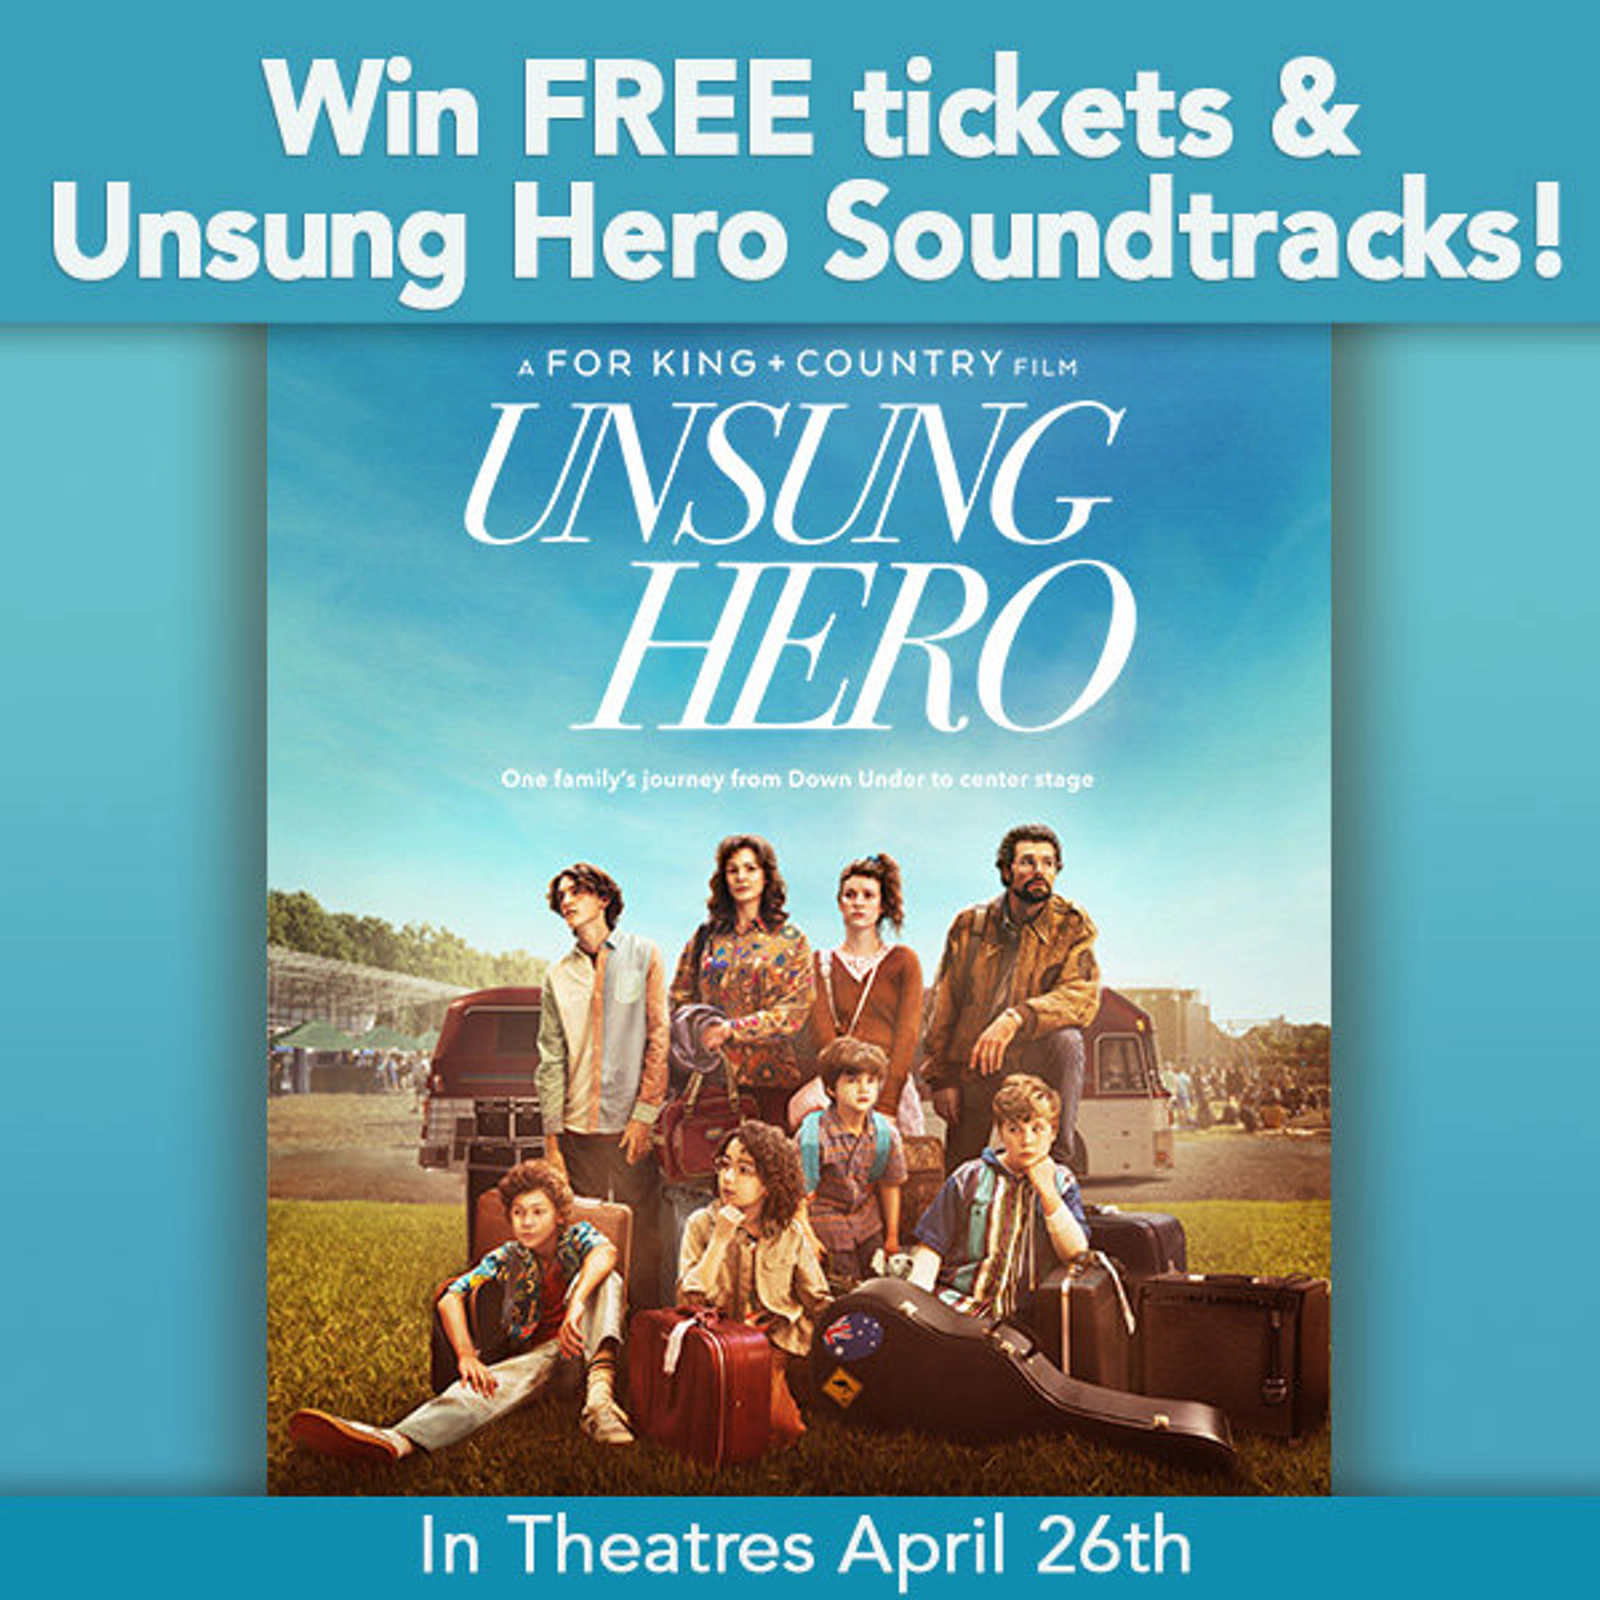 The Unsung Hero VIP Experience Sweepstakes